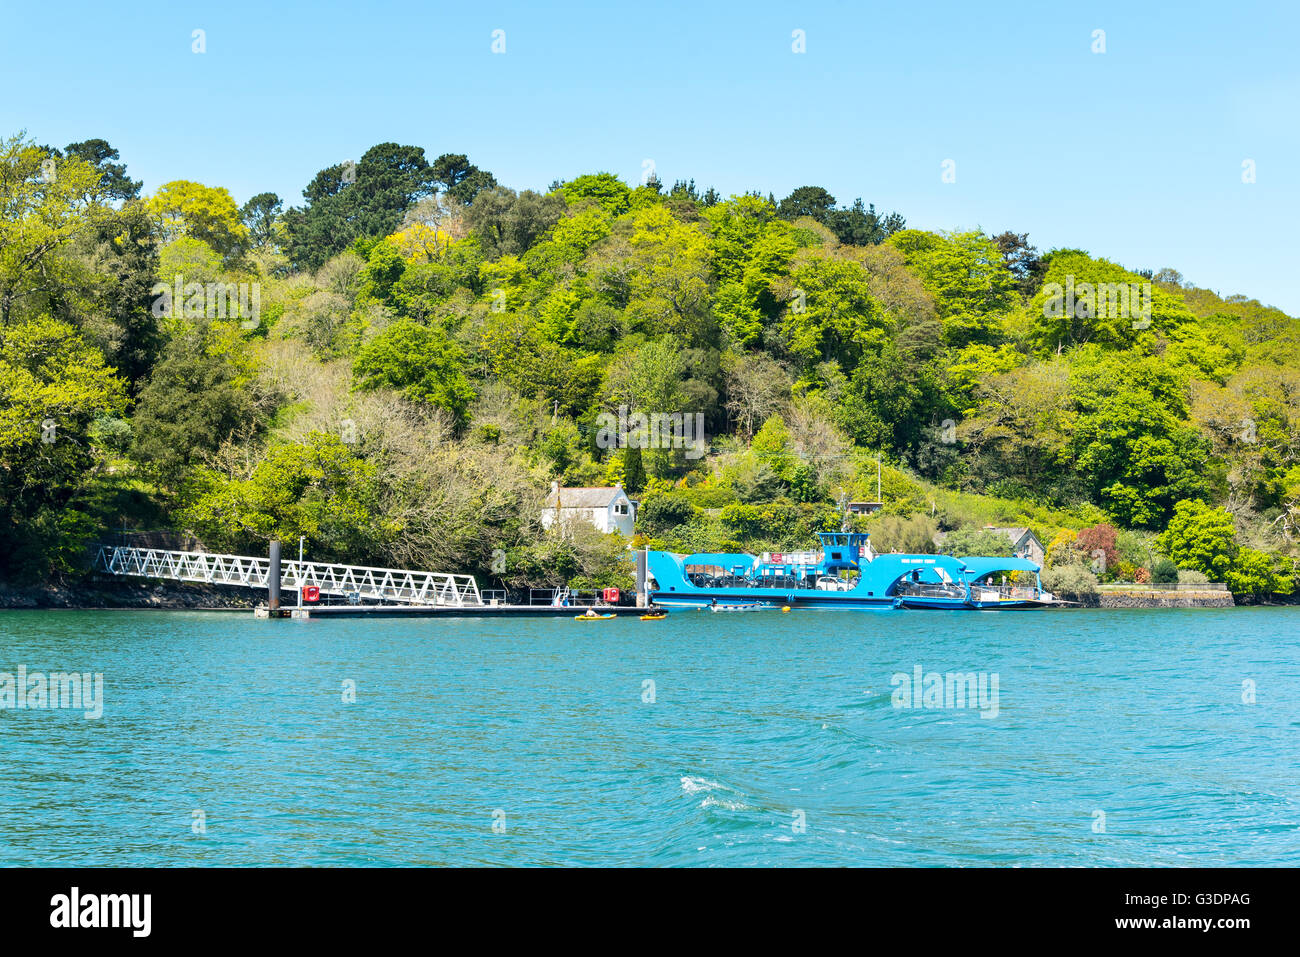 The King Harry Chain Ferry at the Feock Station on the River Fal, Cornwall.  To the left is the boat landing for Trelissick. Stock Photo